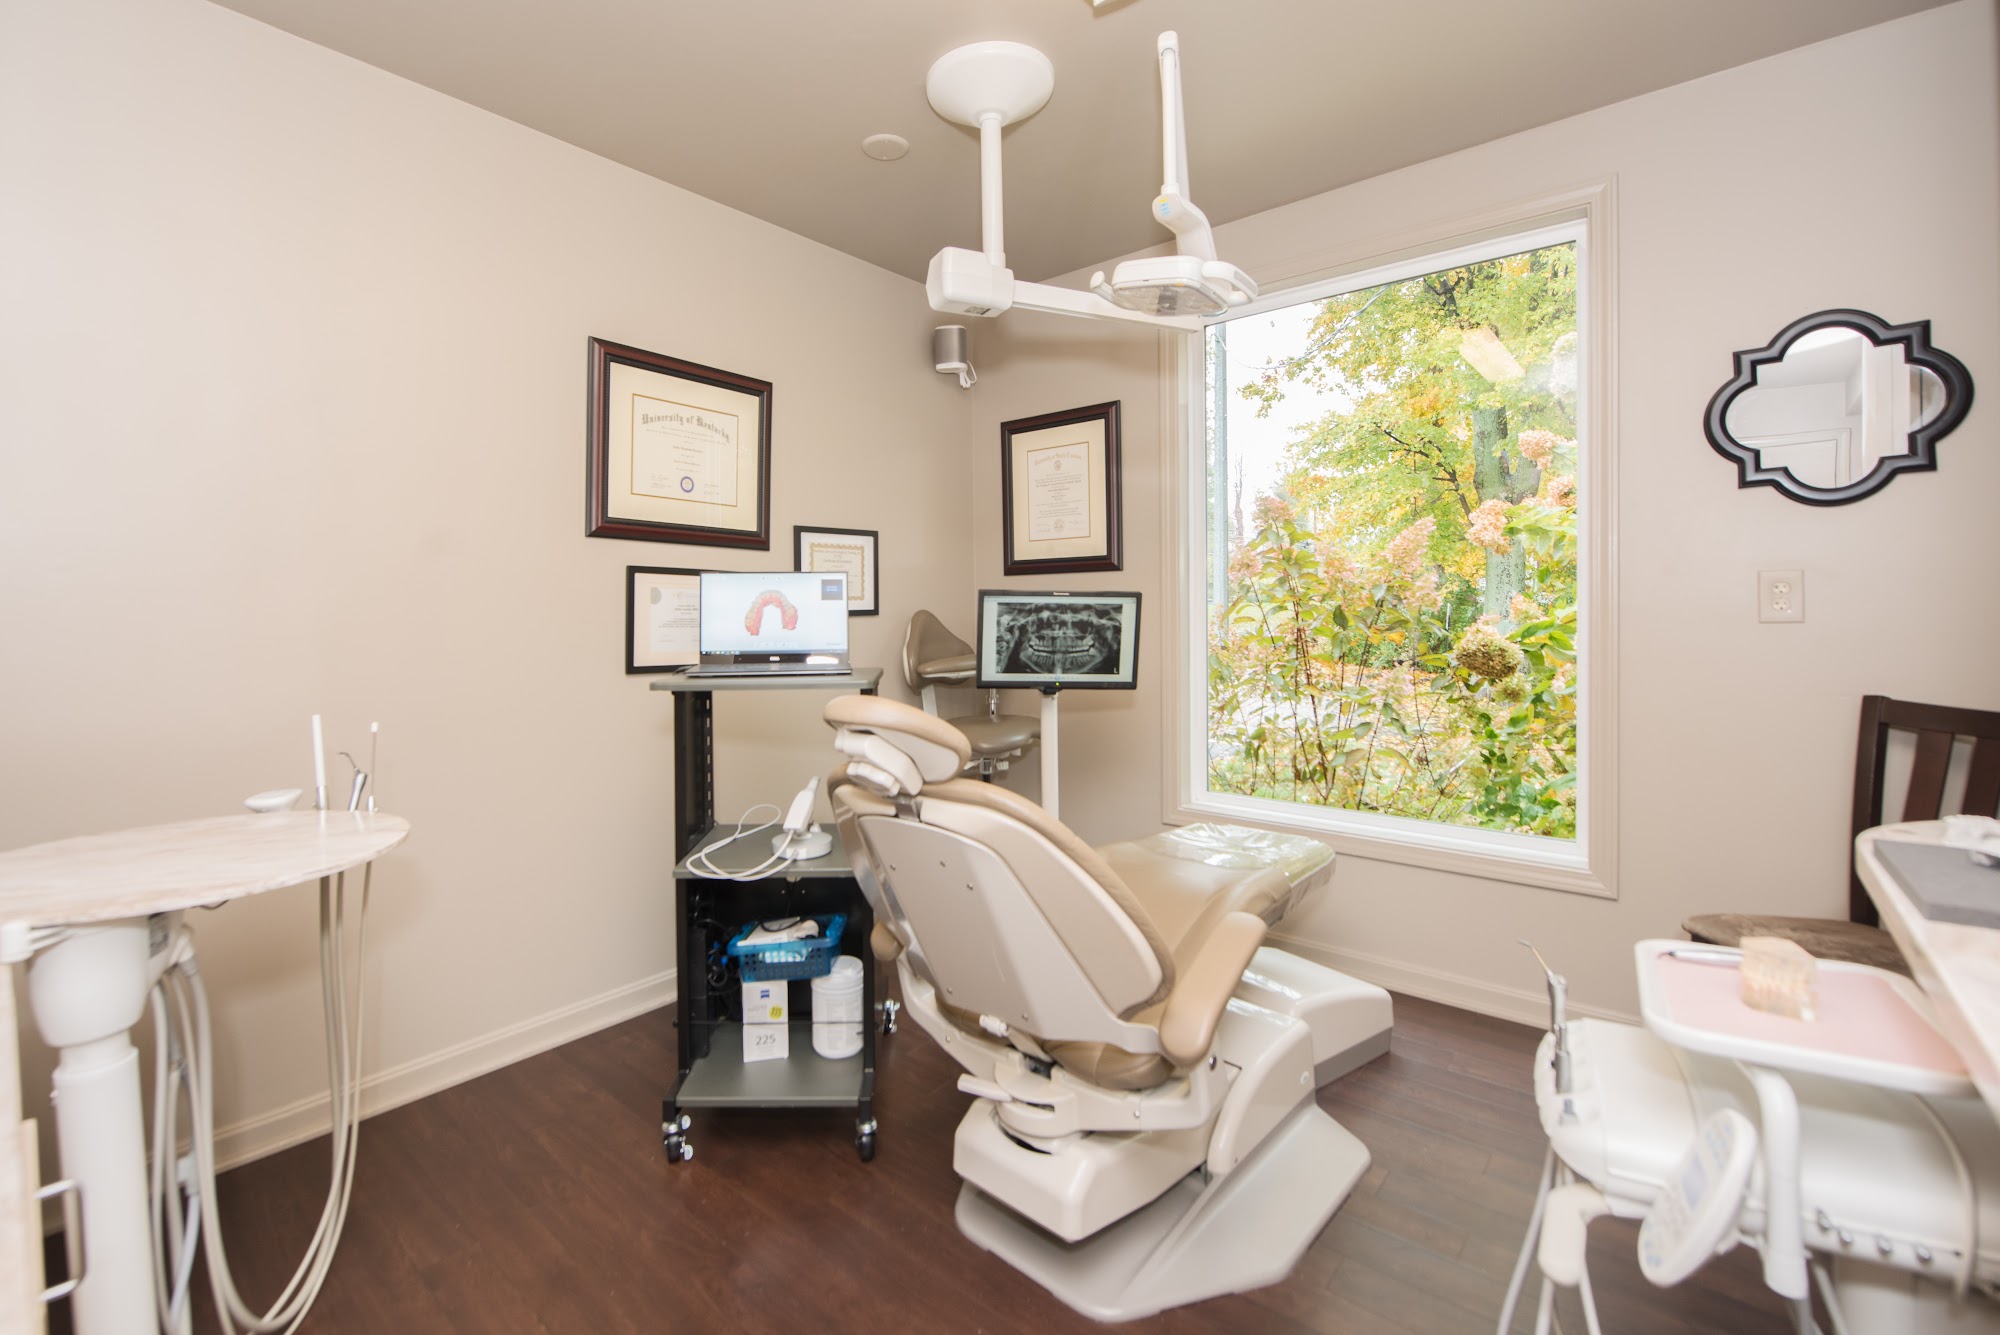 Lavelle Family & Cosmetic Dentistry of Prospect 13104 W U.S. Hwy 42, Prospect Kentucky 40059